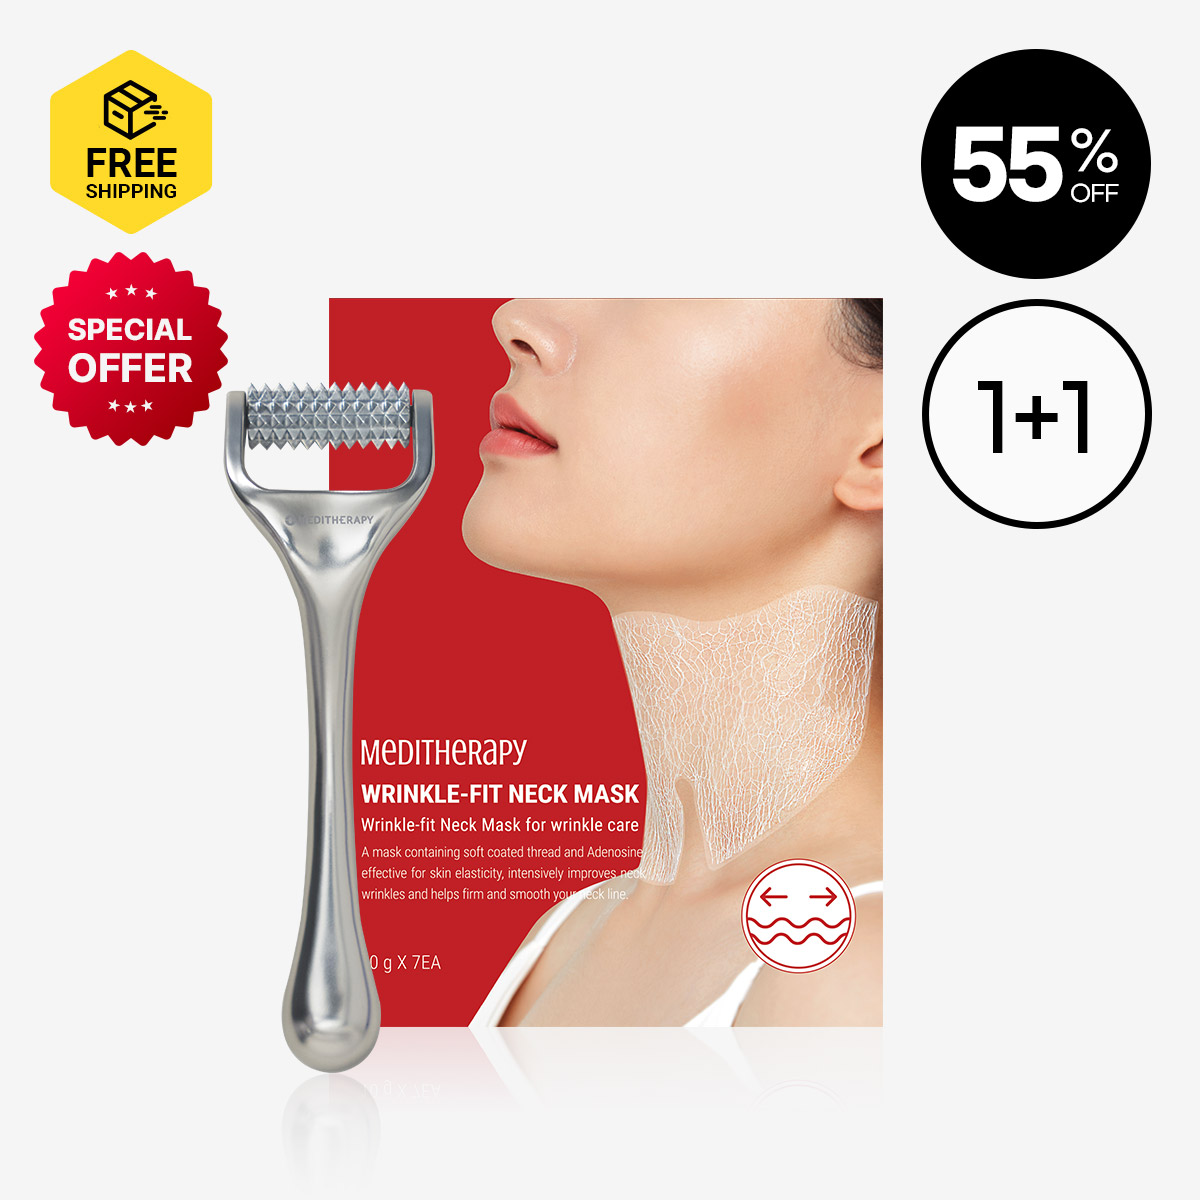 [MEDITHERAPY] Wrinkle-Fit Neck Mask 1 Box + Needle Roller